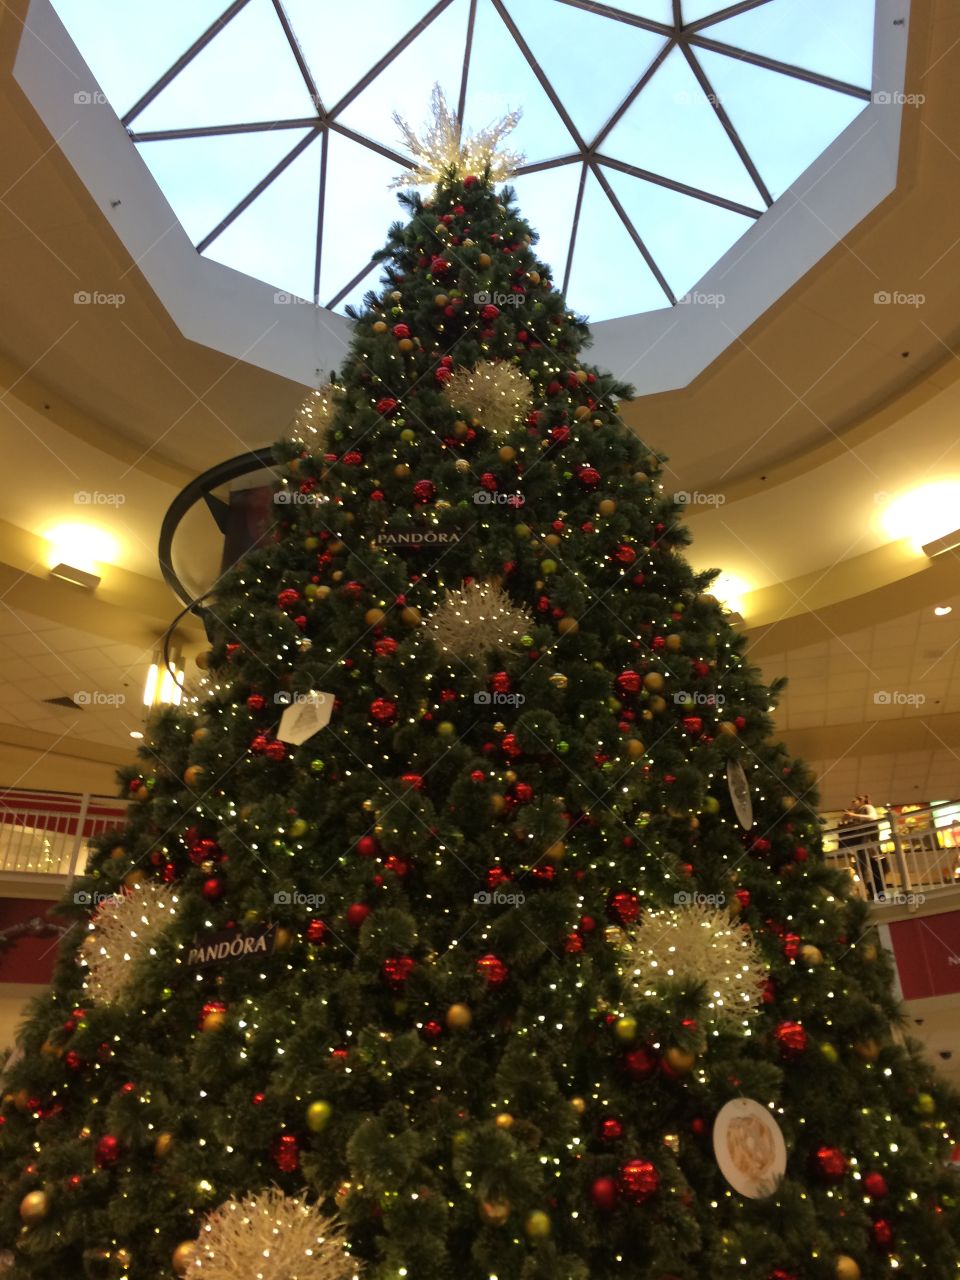 Yuletide at the mall